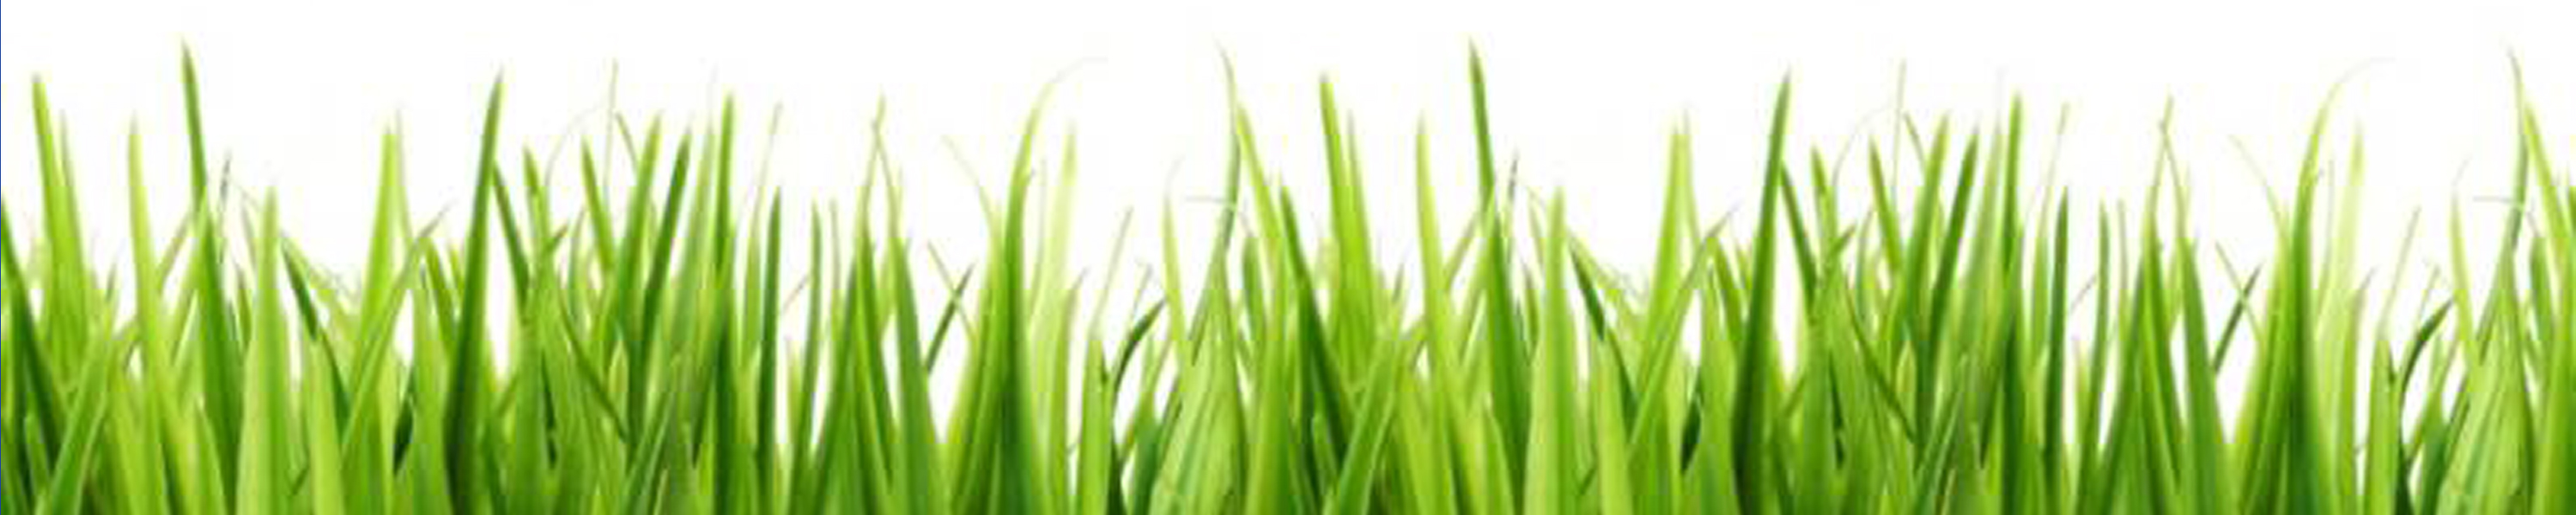 Grass clipart black and white free images 3